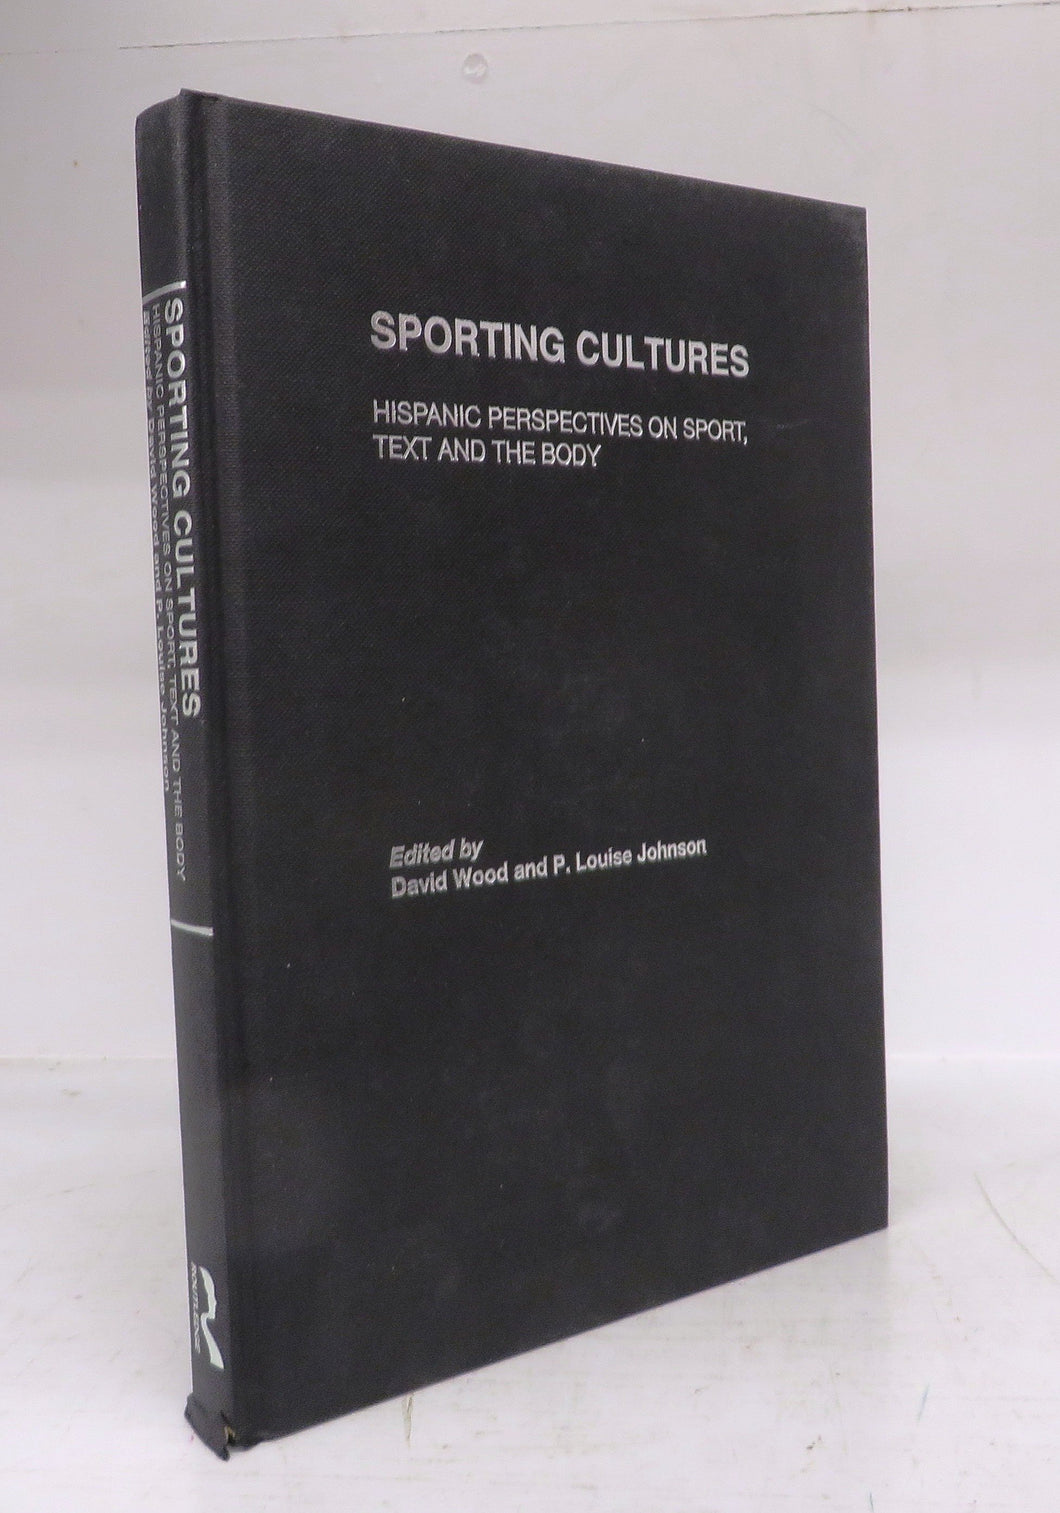 Sporting Cultures: Hispanic Perspectives on Sport, Text and the Body